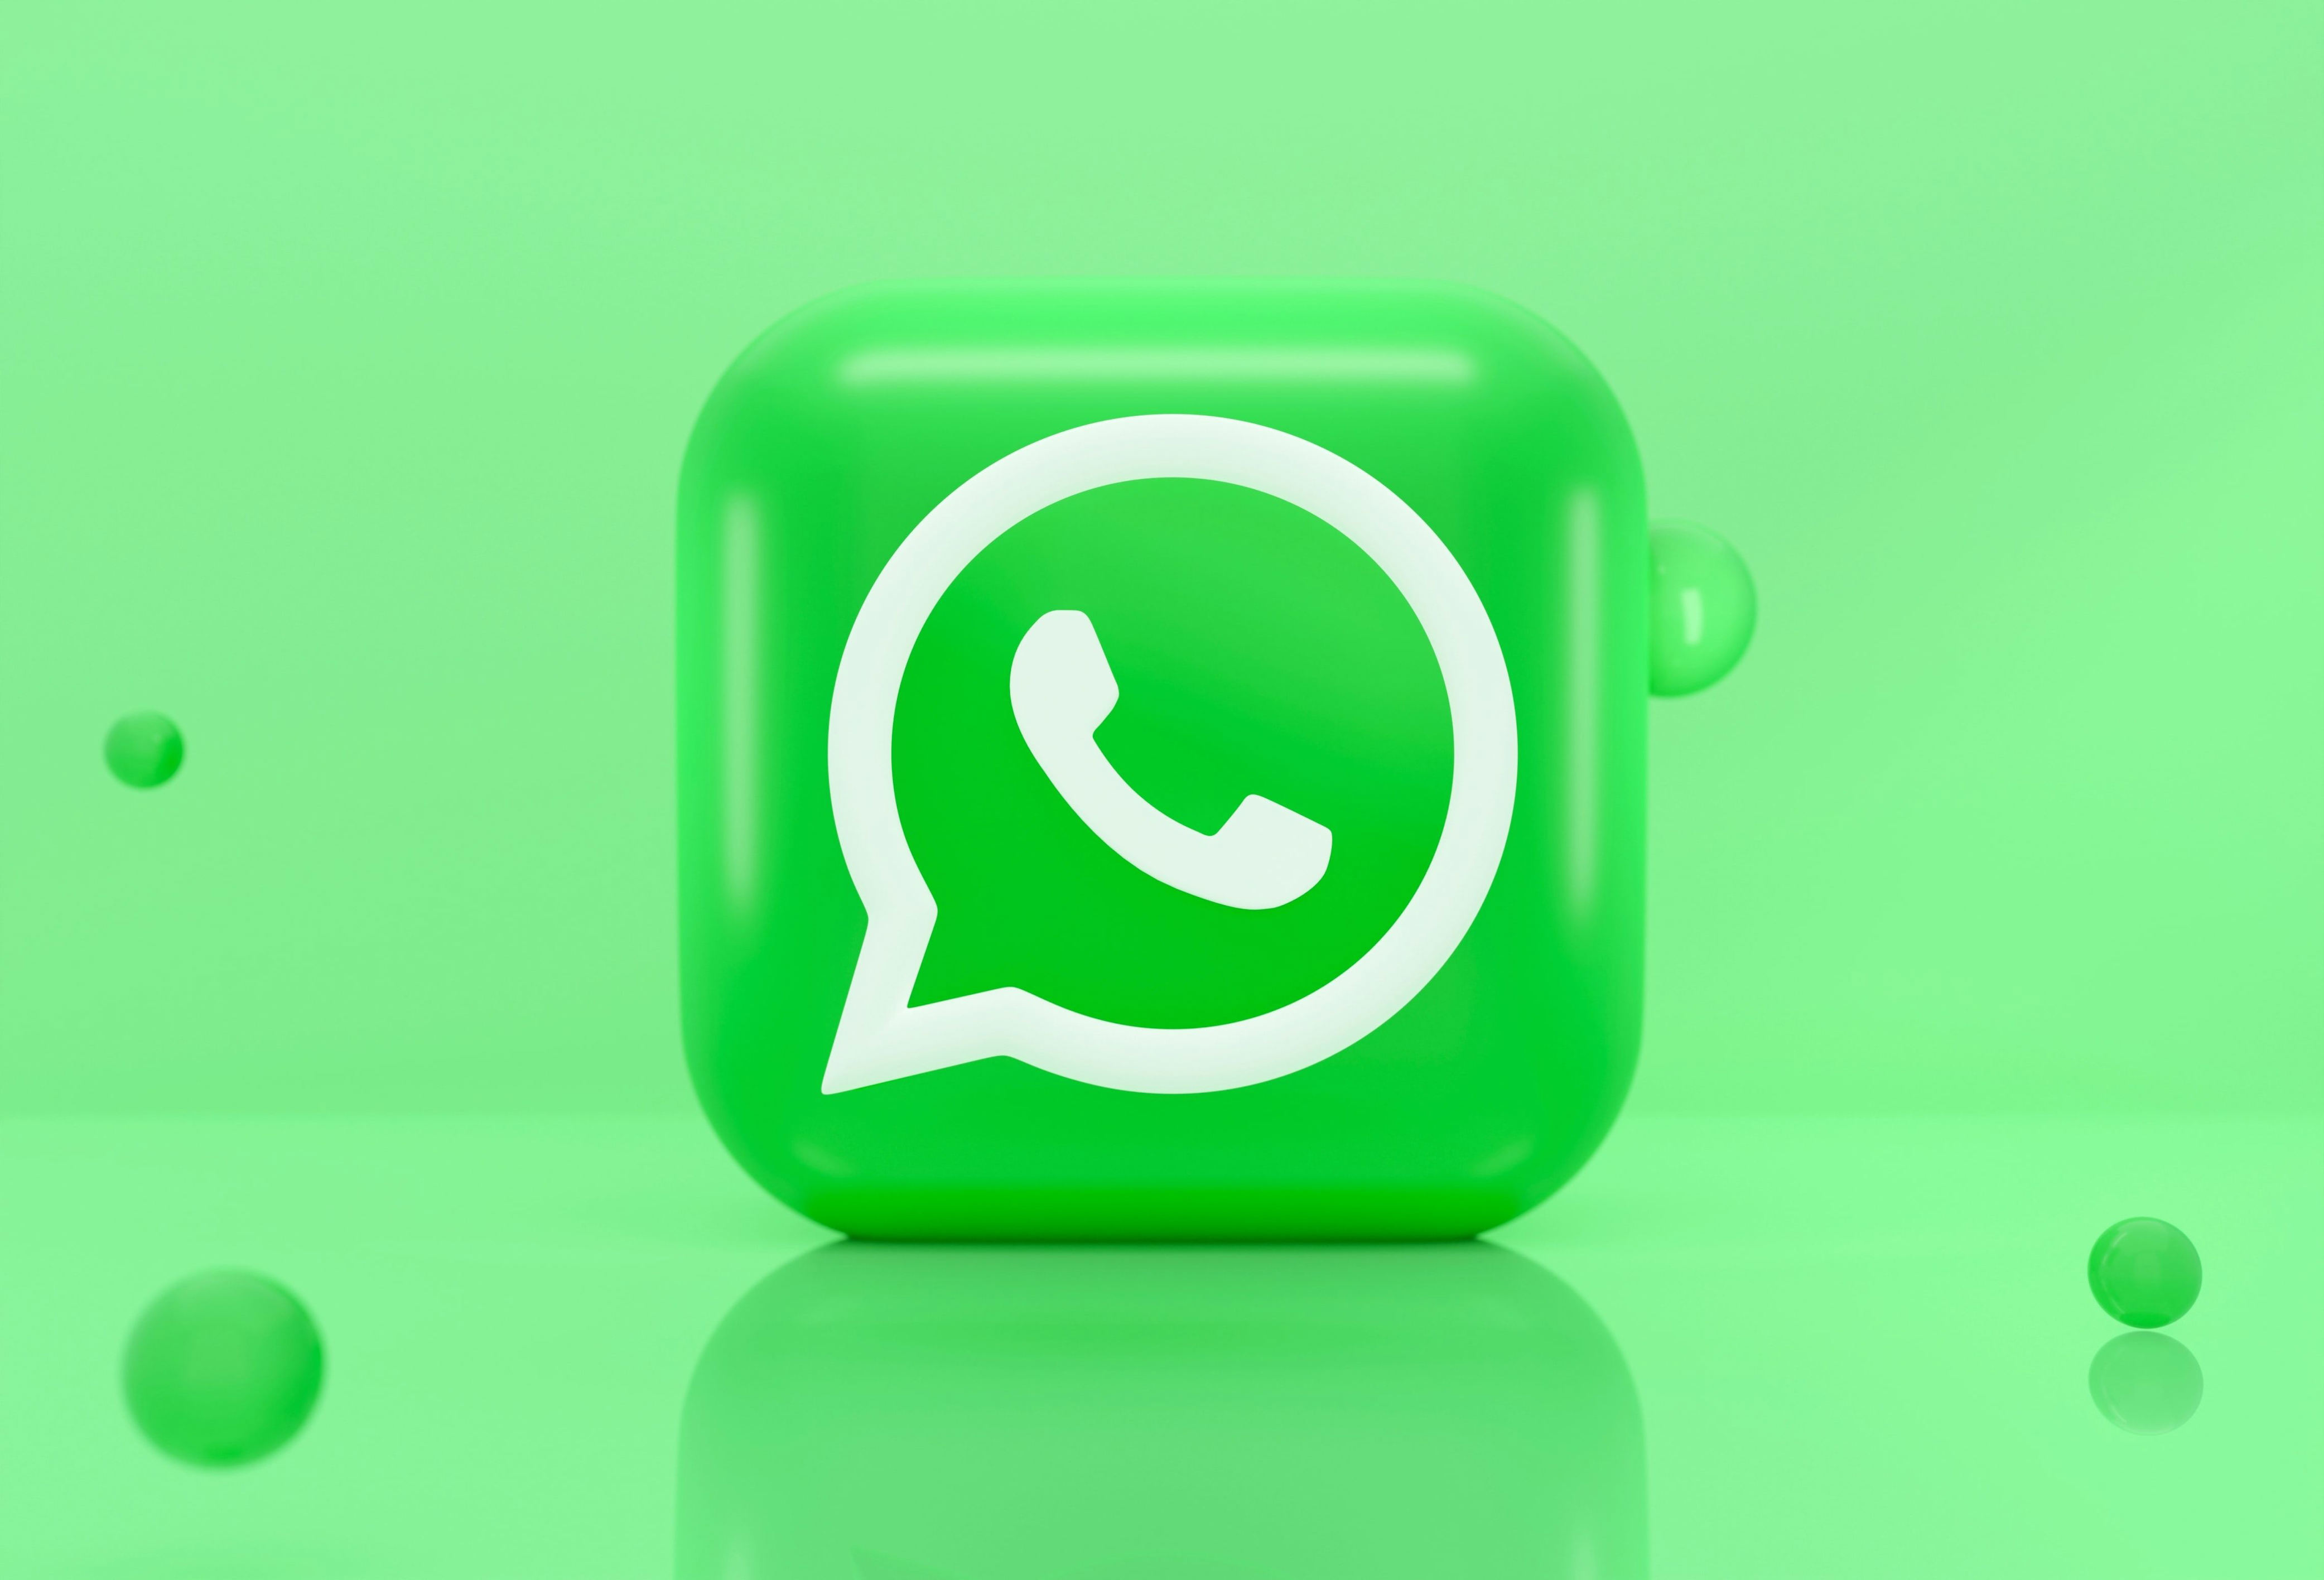  A 3D illustration of the WhatsApp logo on a green background with the reflection of the logo on the surface.